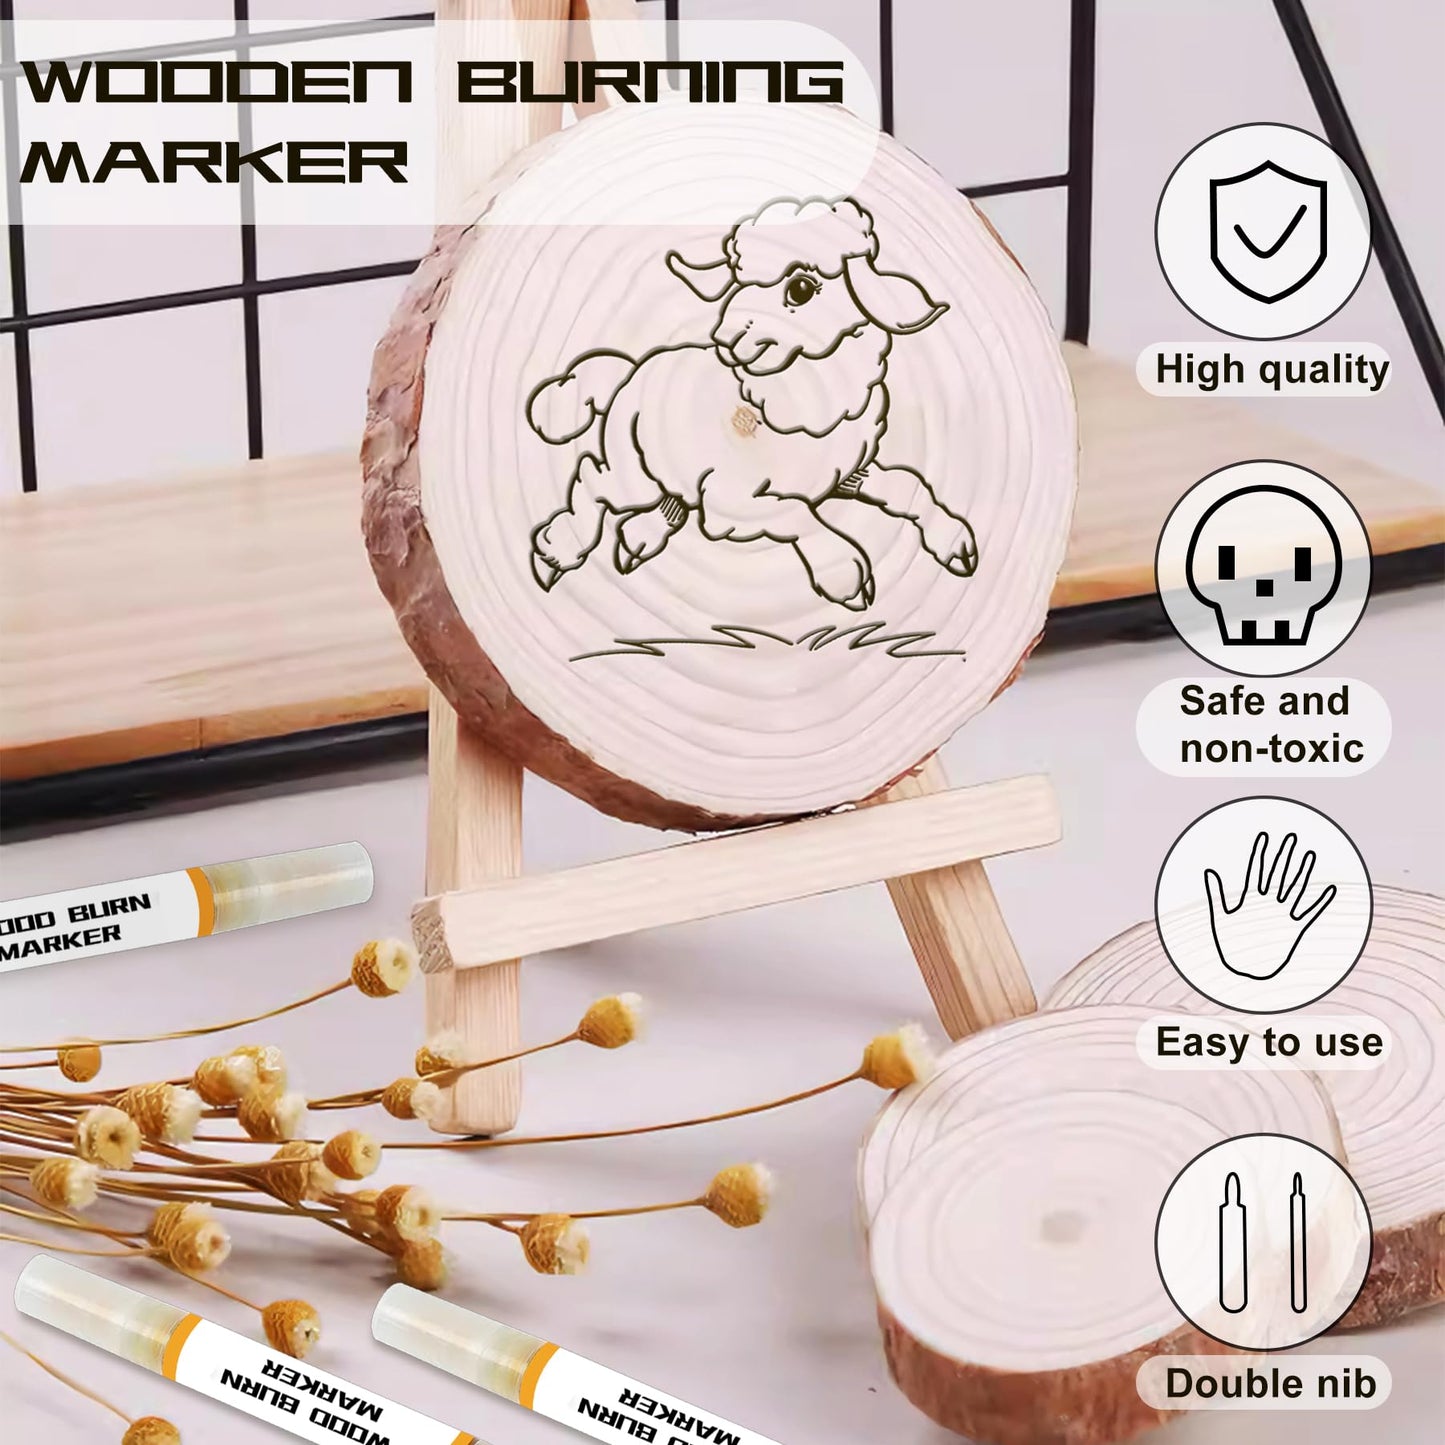 1DFAUL Wooden Burning Marker, 4PCS Scorch Pen for Wood Burn, Double Sided Art Wood Burn Paste Marker, Accurately & Easily Burn Designs on Wood & Crafts, Suitable for Beginners DIY Wood